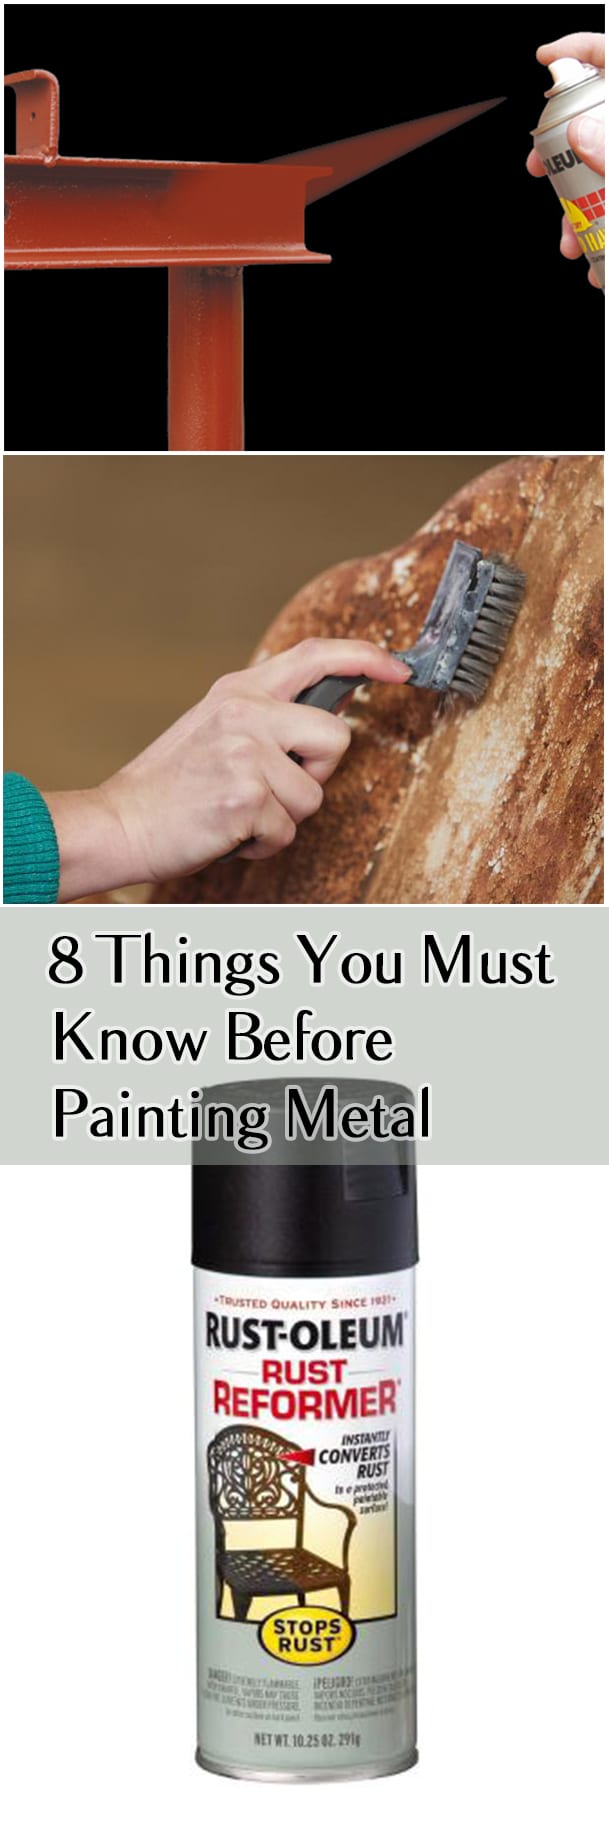 How to paint metal, metal restoration ideas, painting metal, DIY metal projects, popular pin, DIY home projects, home projects, easy home improvement, spray paint projects